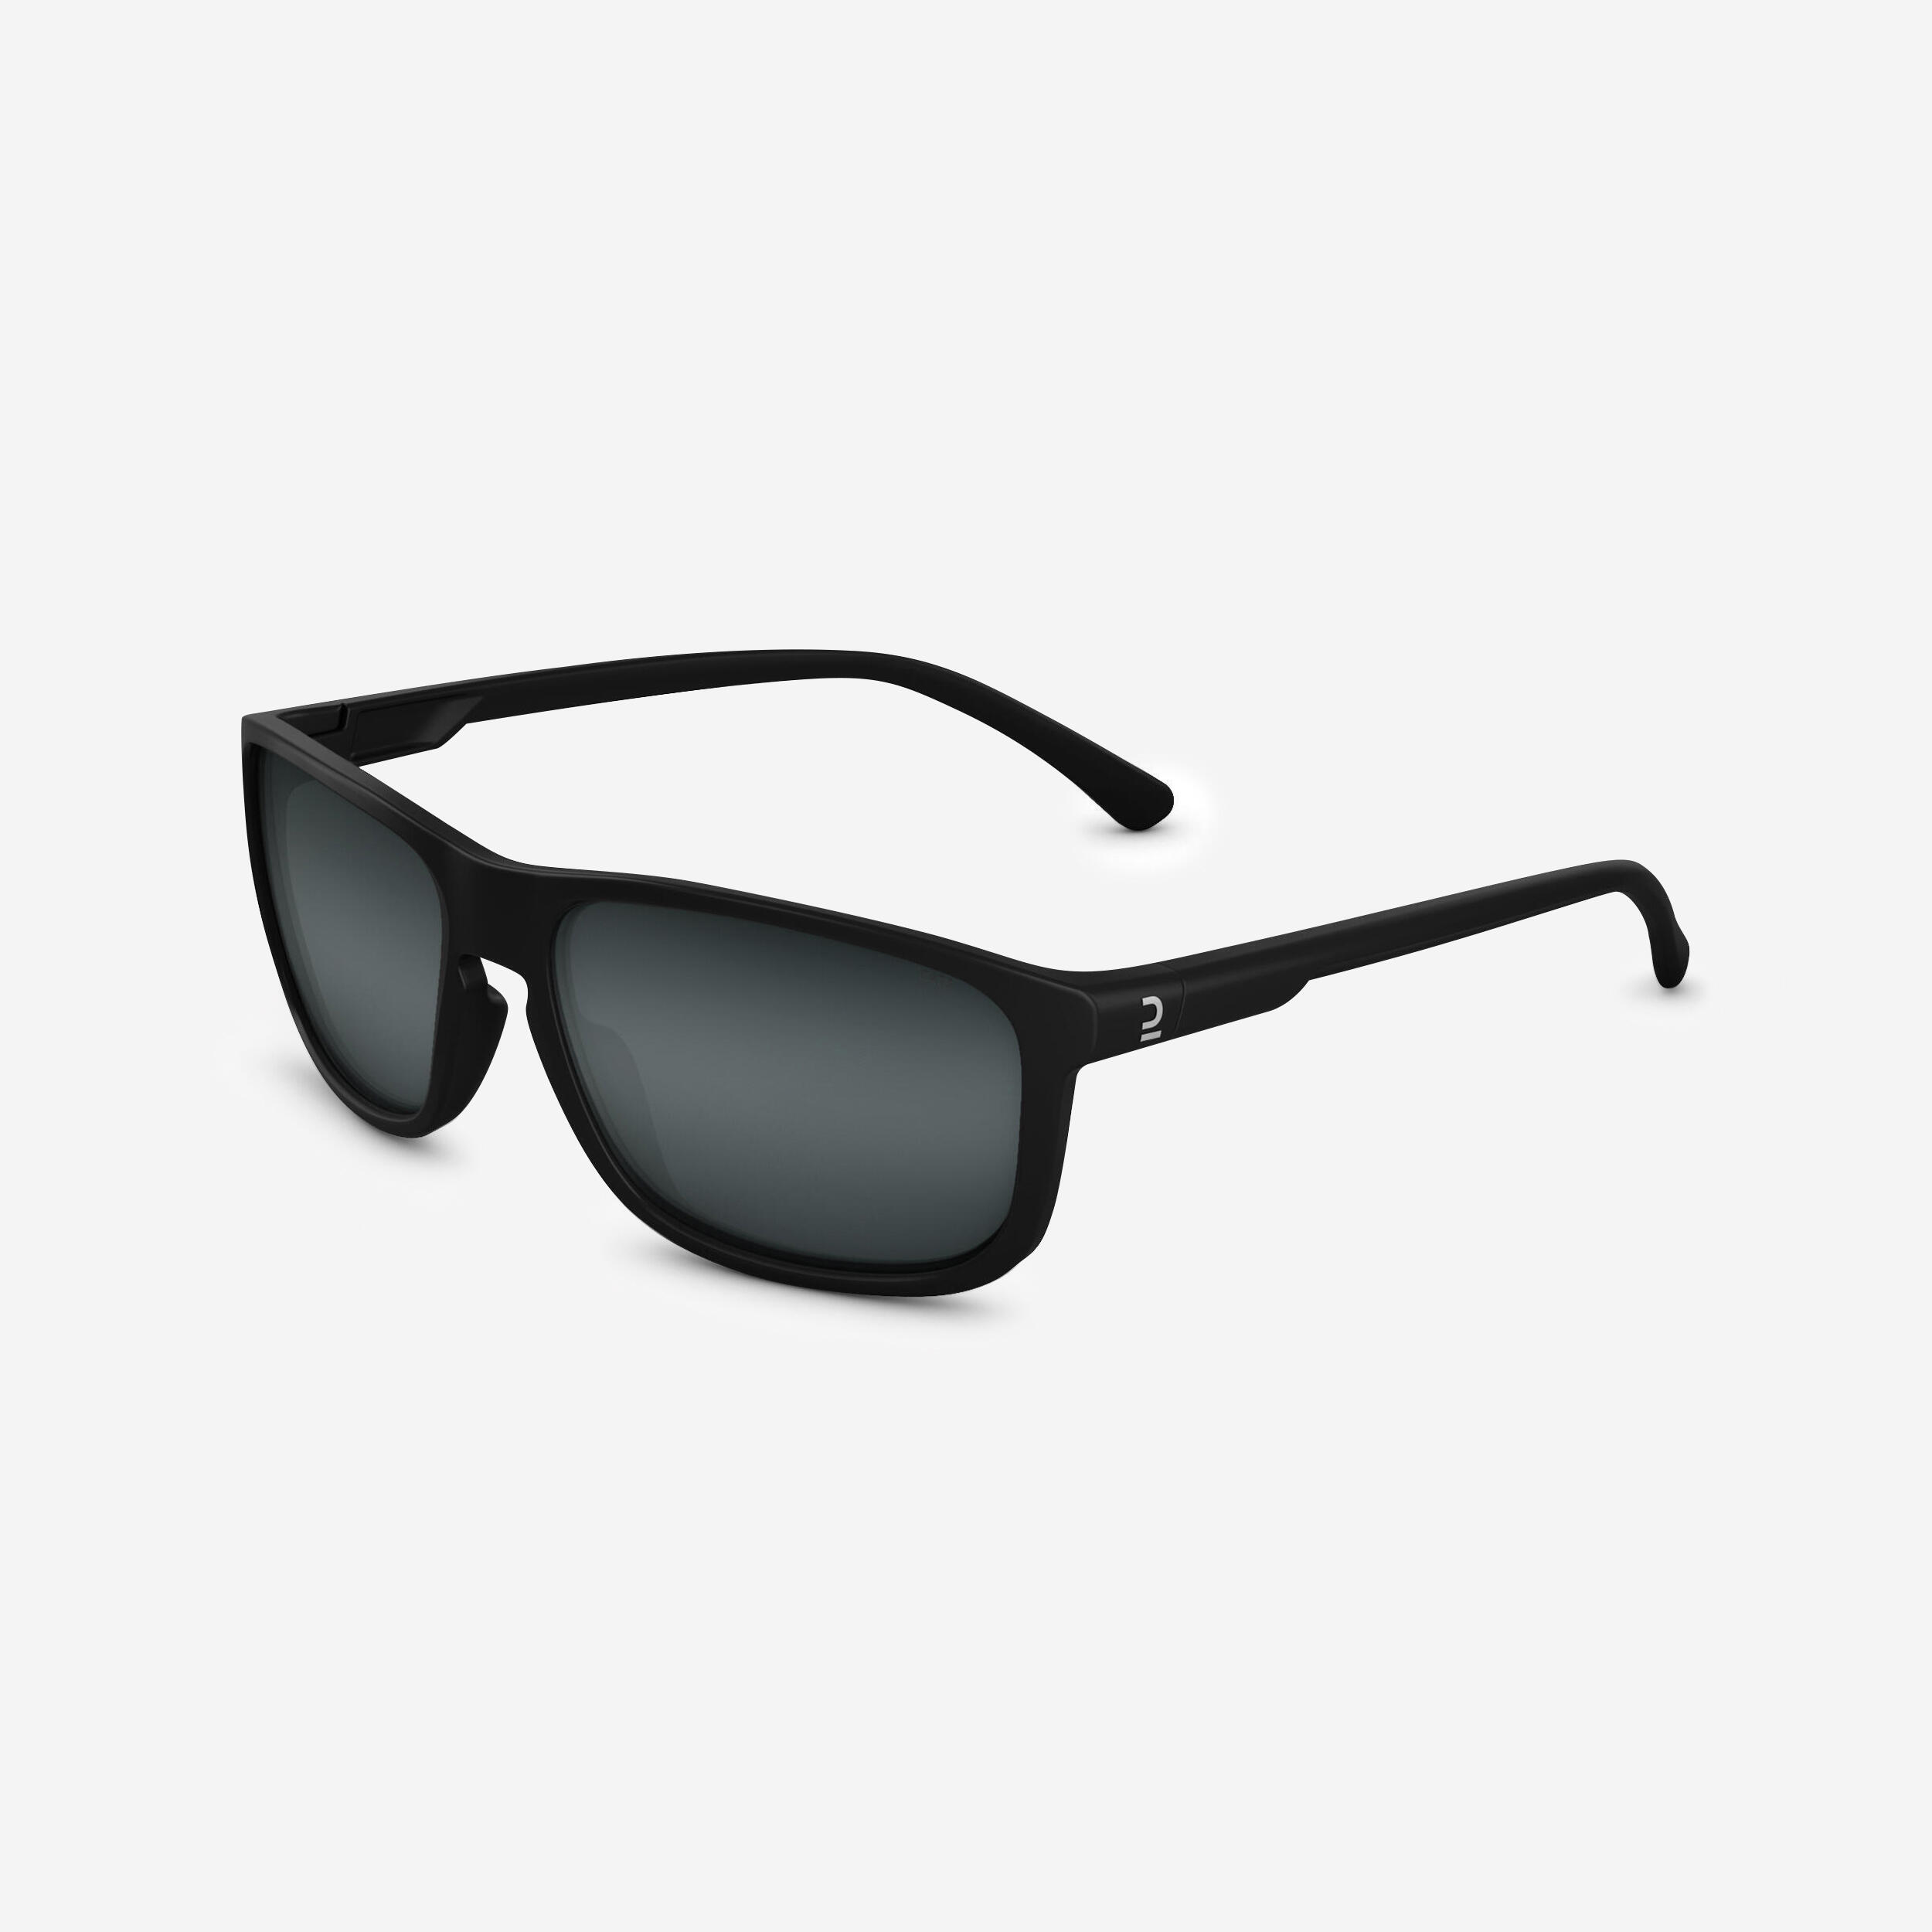 ADULT HIKING SUNGLASSES  MH100  CATEGORY 3 1/9